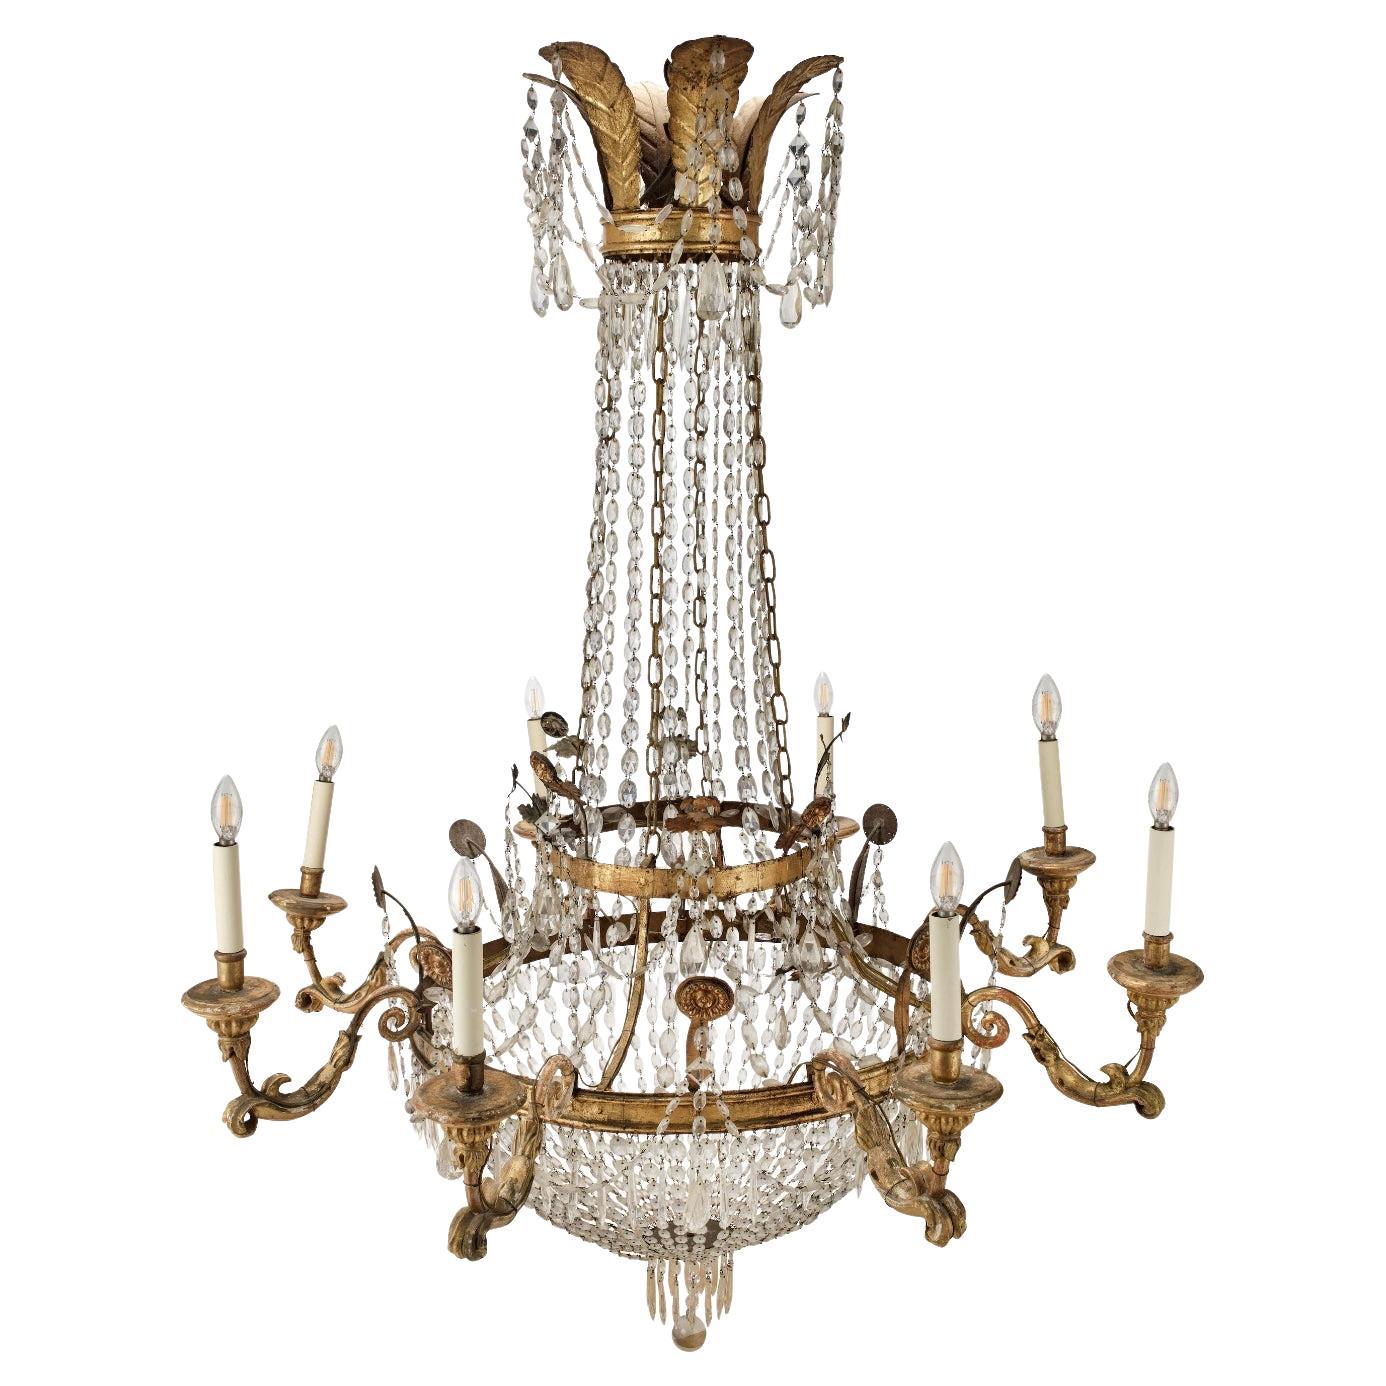 Impressive 19th Century Italian Gilt Carved Wood and Cut Glass Chandelier 